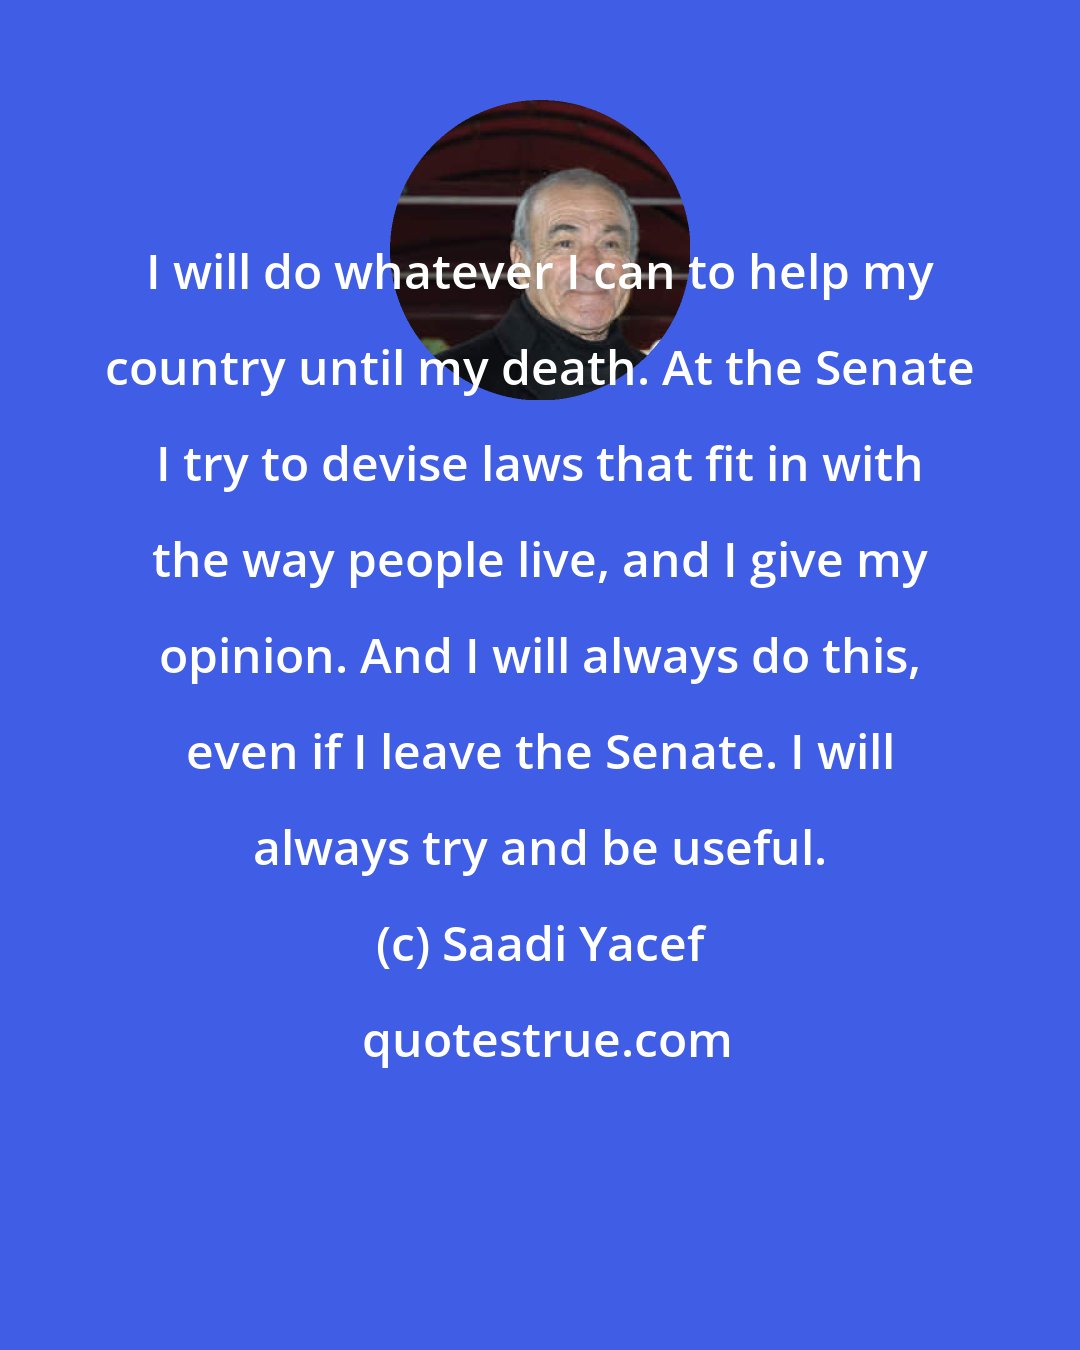 Saadi Yacef: I will do whatever I can to help my country until my death. At the Senate I try to devise laws that fit in with the way people live, and I give my opinion. And I will always do this, even if I leave the Senate. I will always try and be useful.